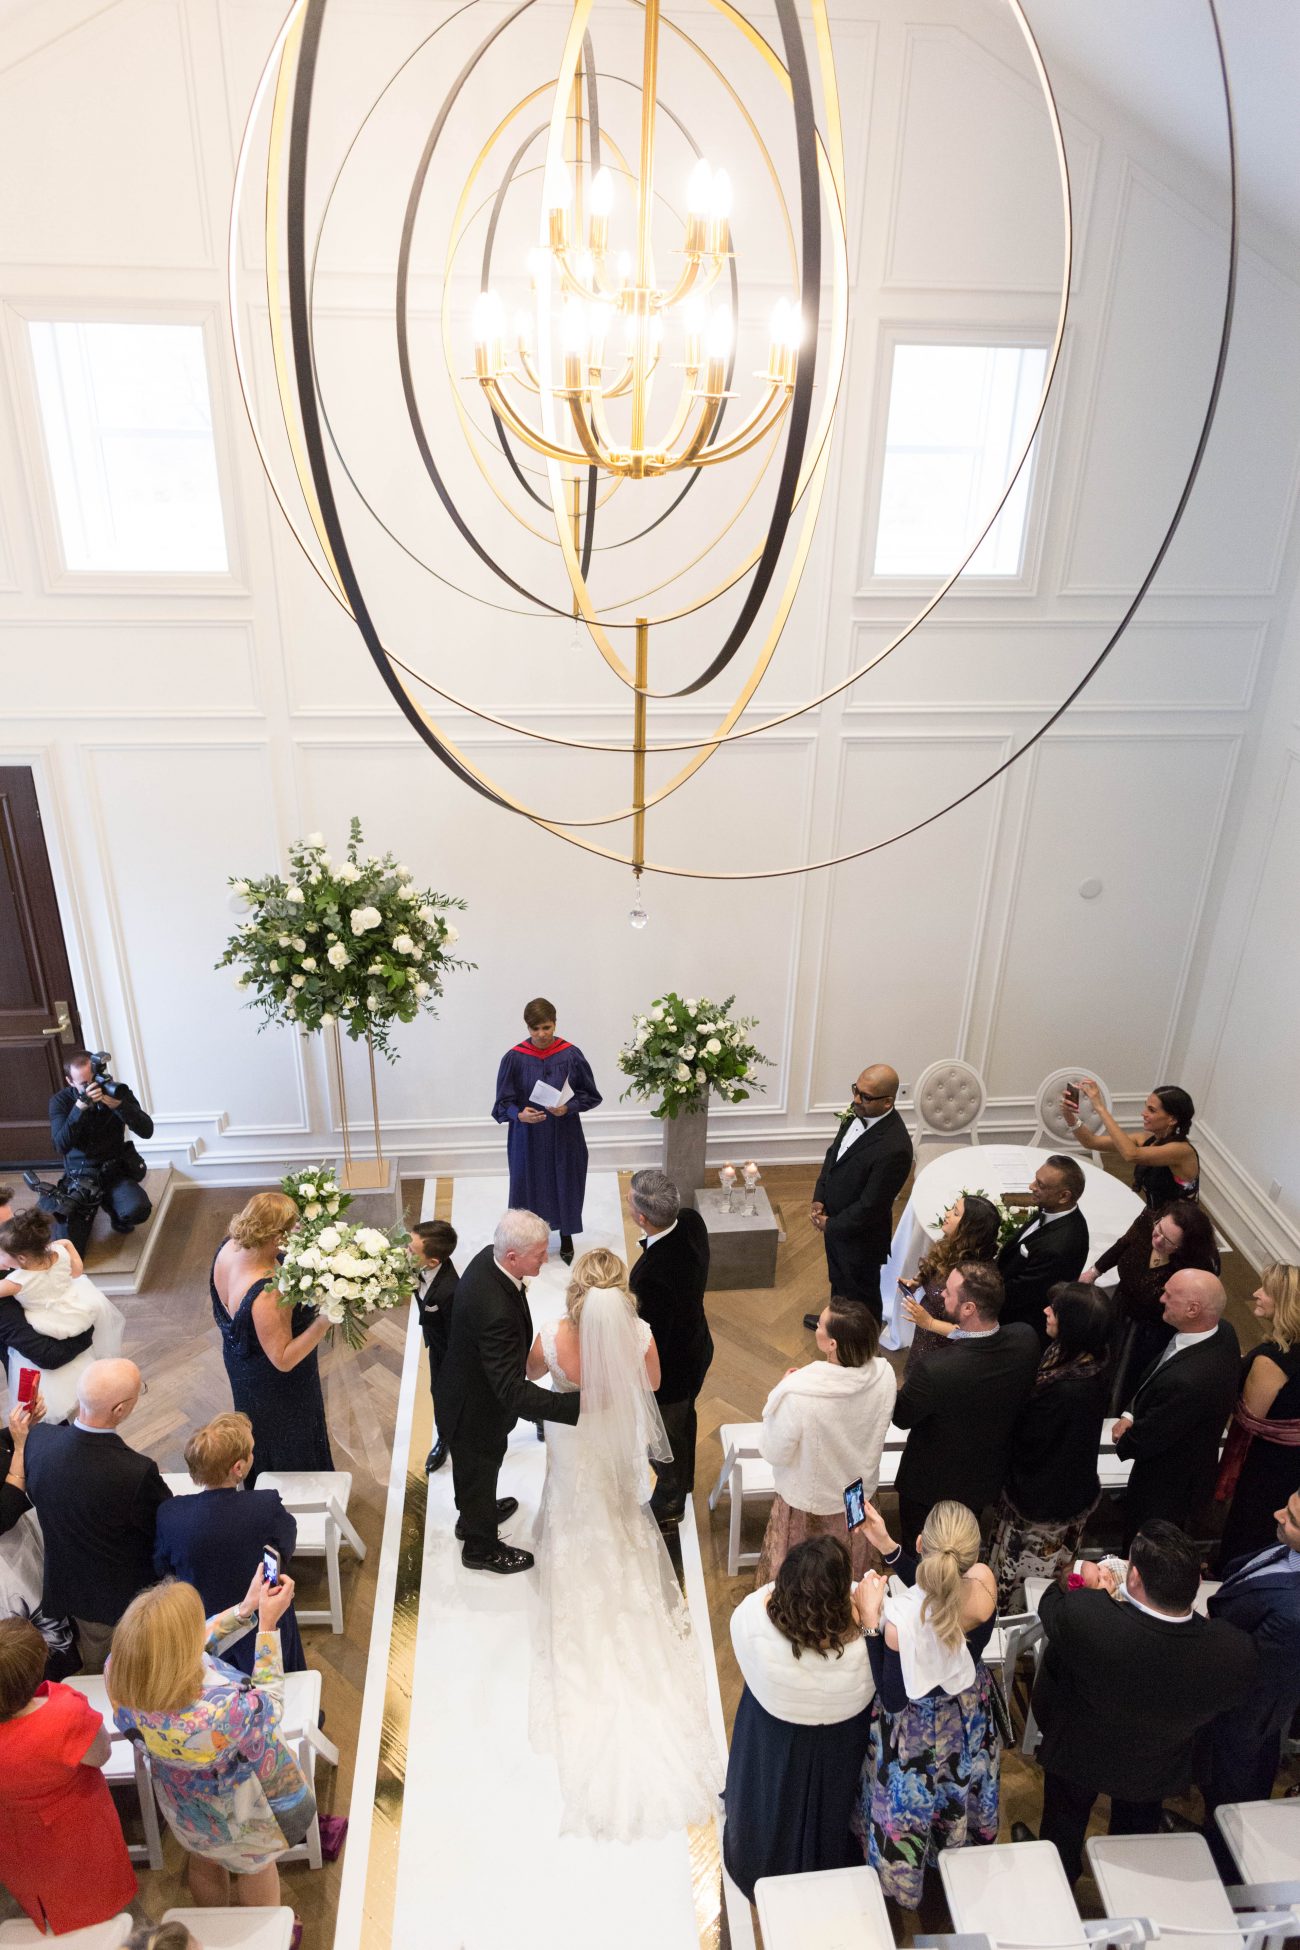 Wedding ceremony at the Heritage House Chapel